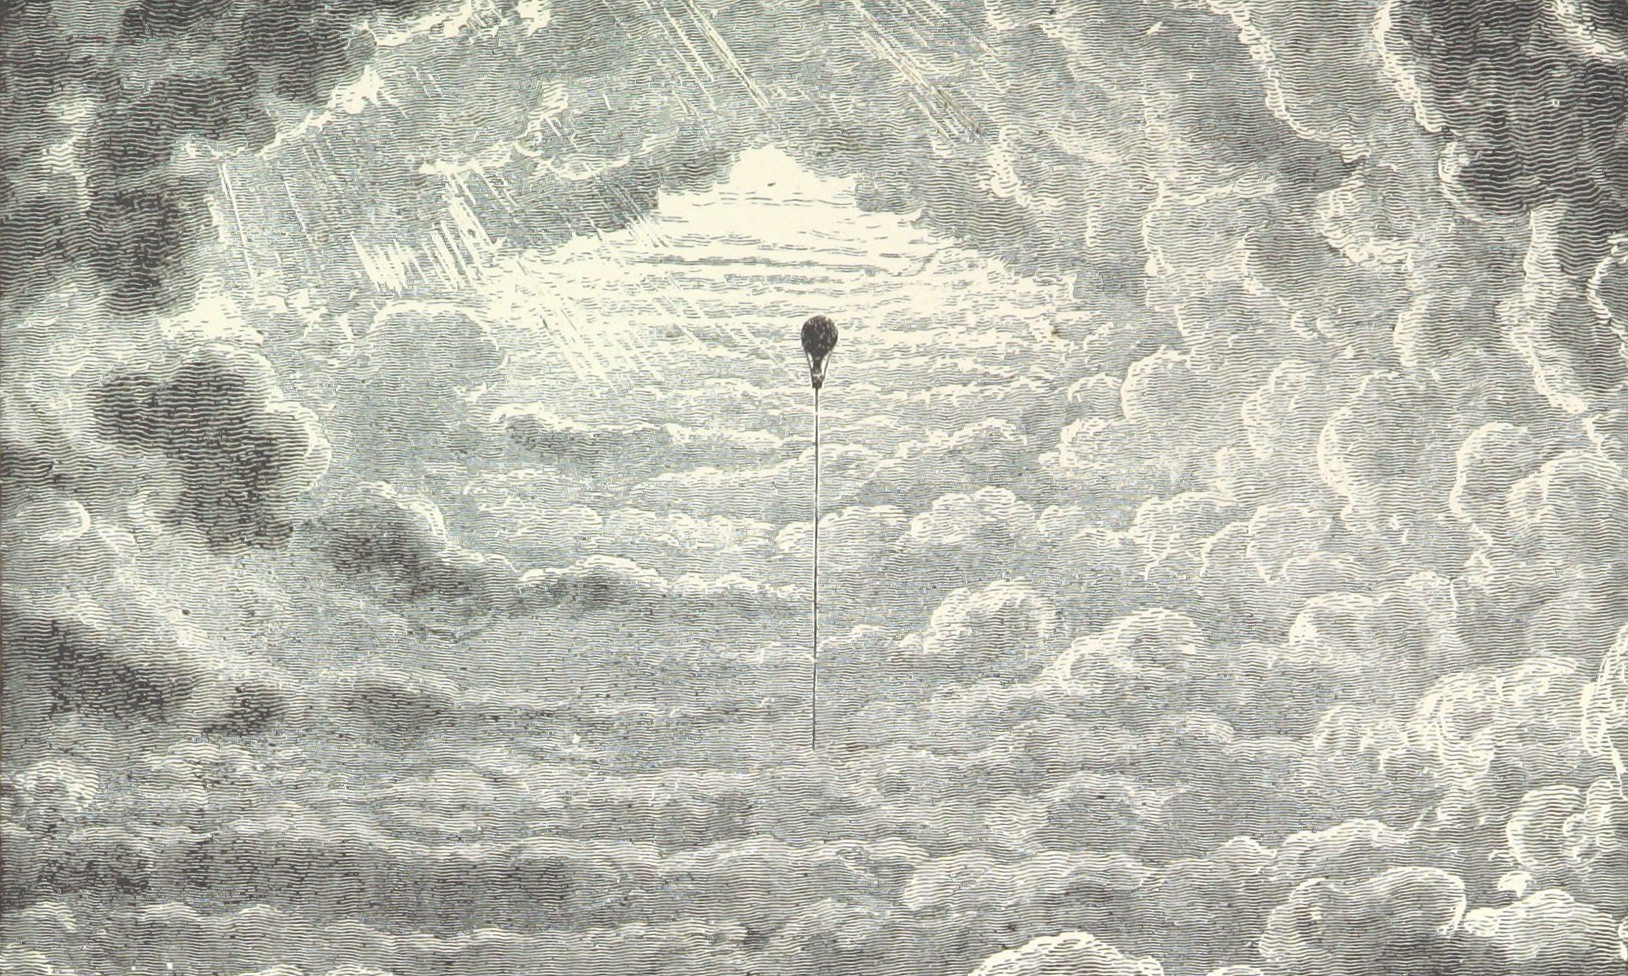 A wood carving of a weather balloon floating among clouds.